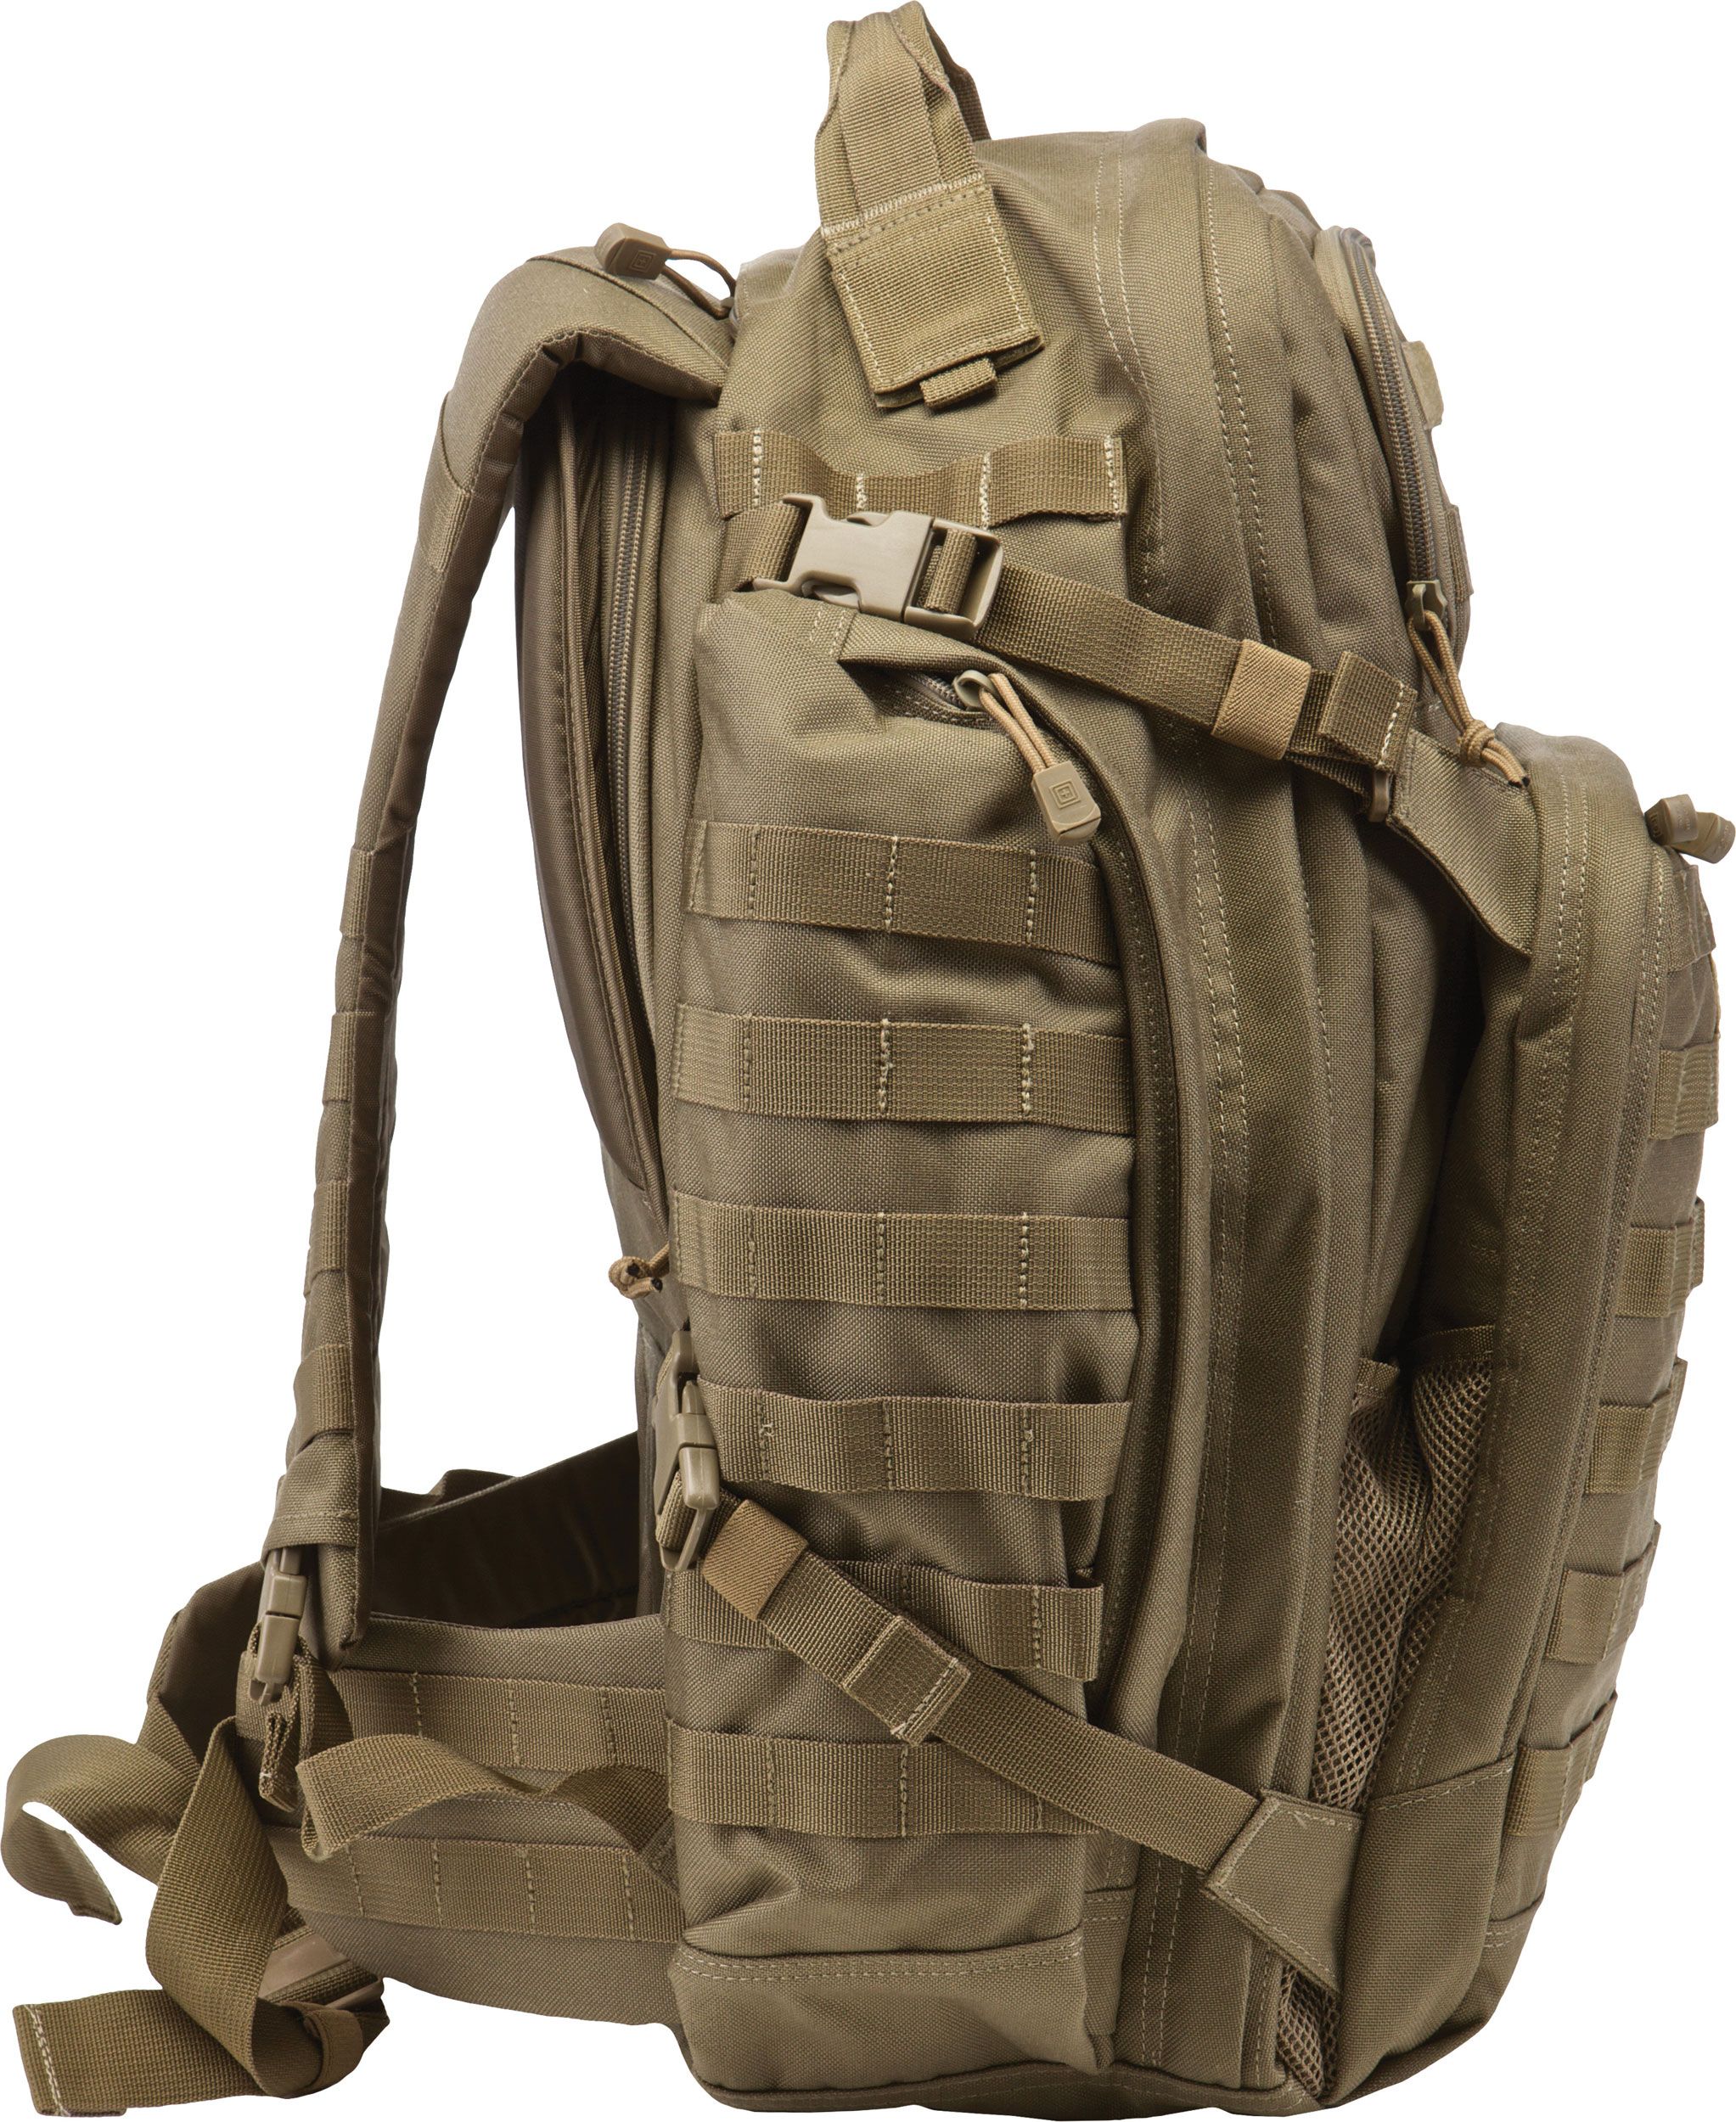 5.11 Tactical RUSH 72 Backpack, Double Tap (58602-026) - KnifeCenter